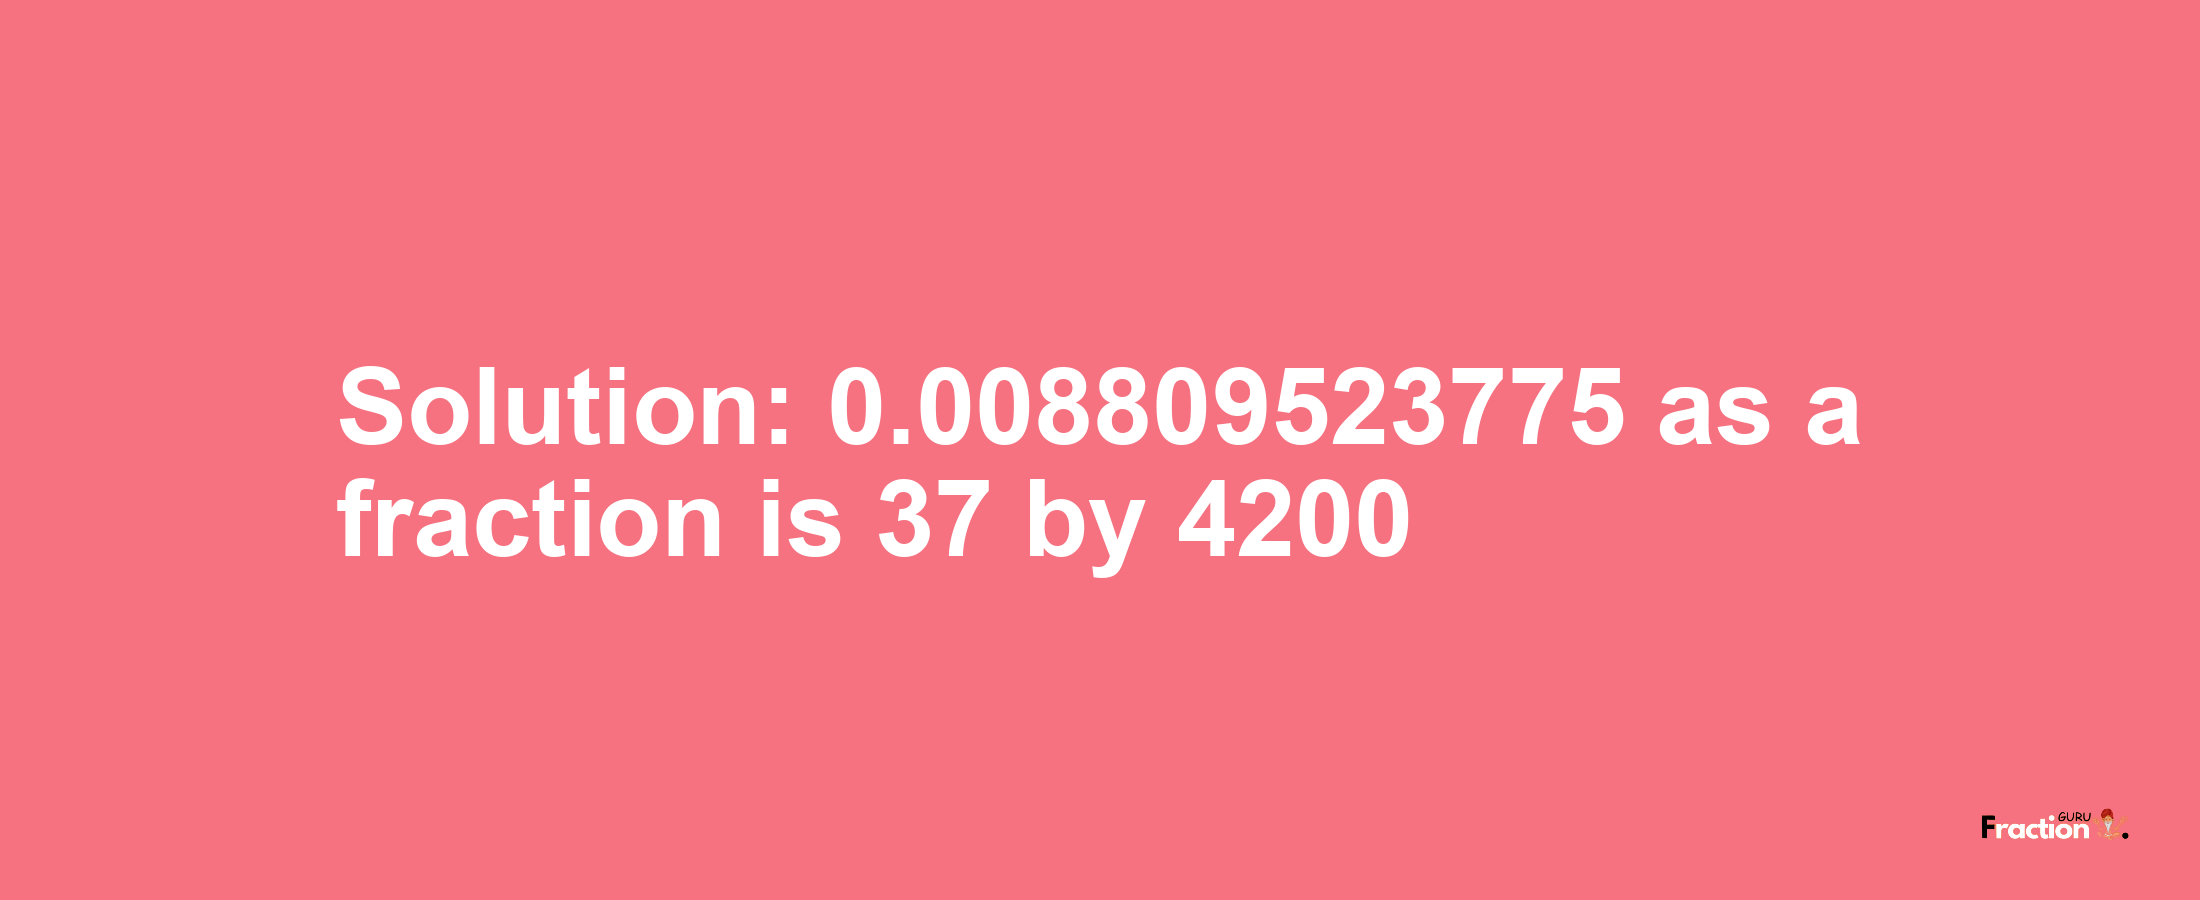 Solution:0.008809523775 as a fraction is 37/4200